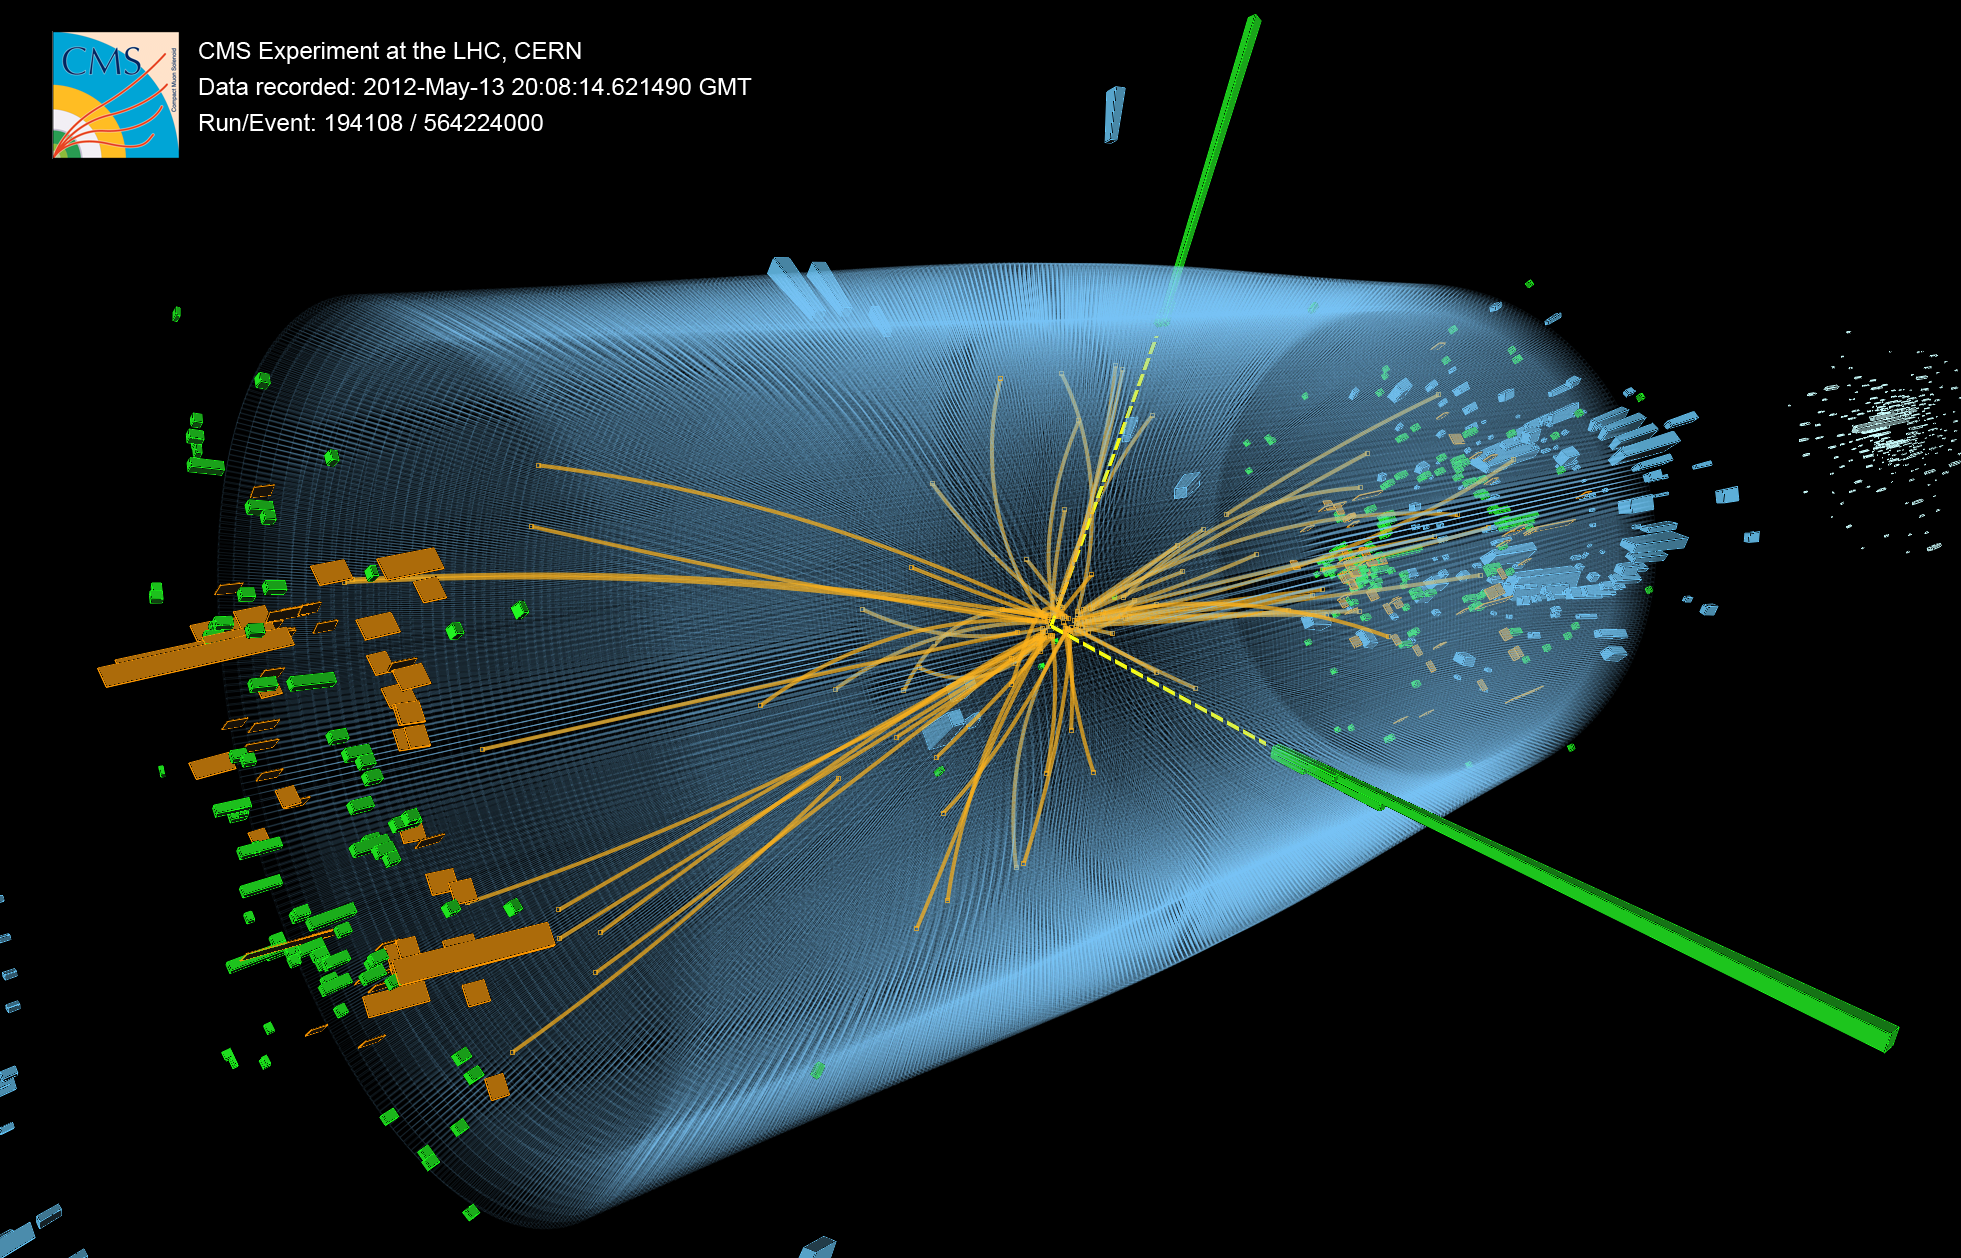  Dark matter may be produced at the Large Hadron Collider and other accelerator experiments.    [Image: CERN] 